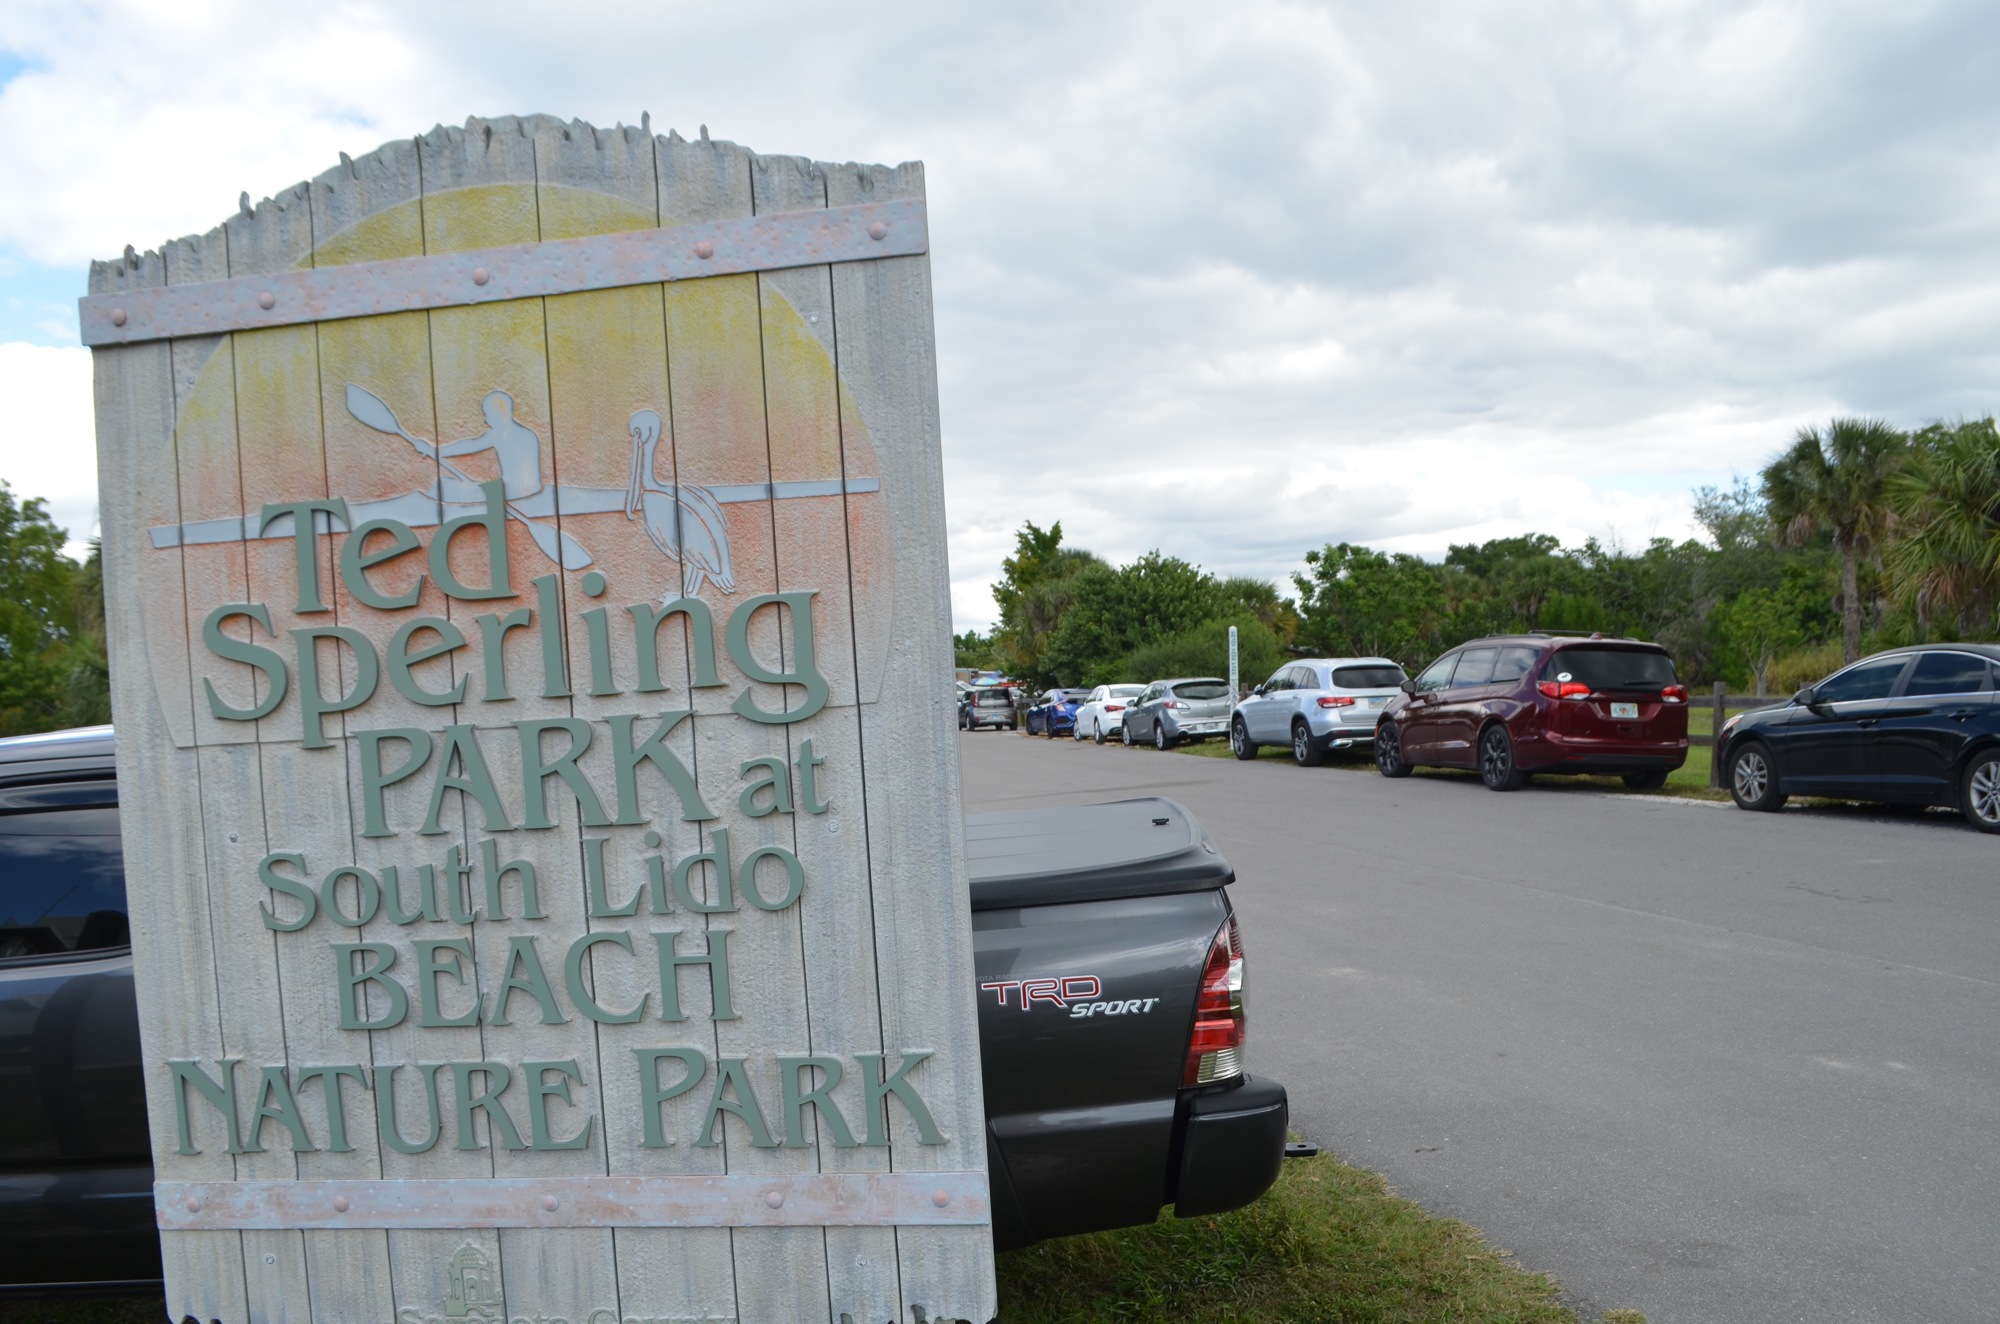 Ted Sperling Park is operated by Sarasota County Parks and Recreation.